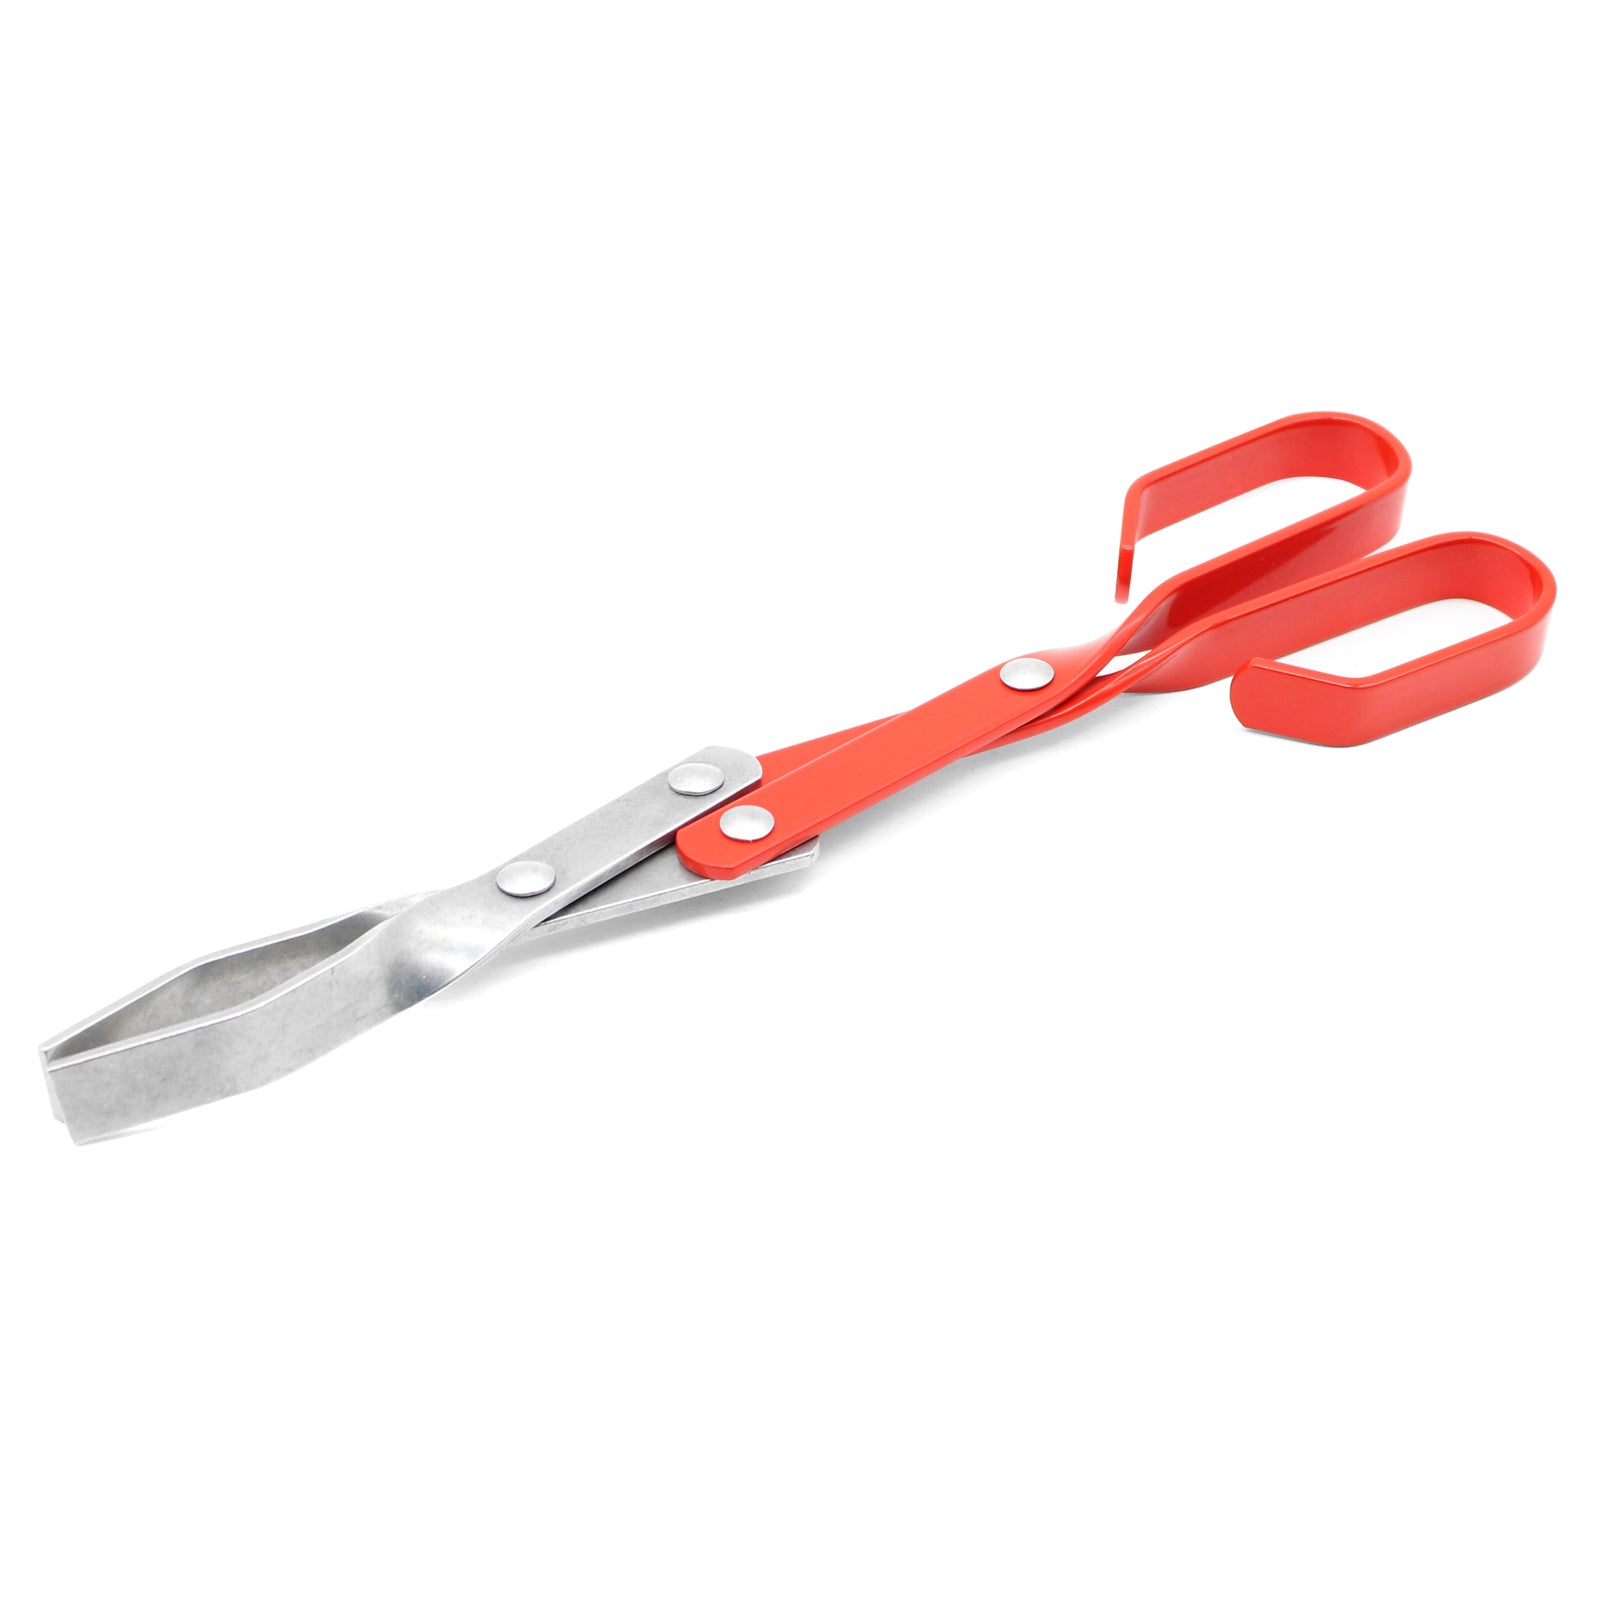 Tongs for Barbecue